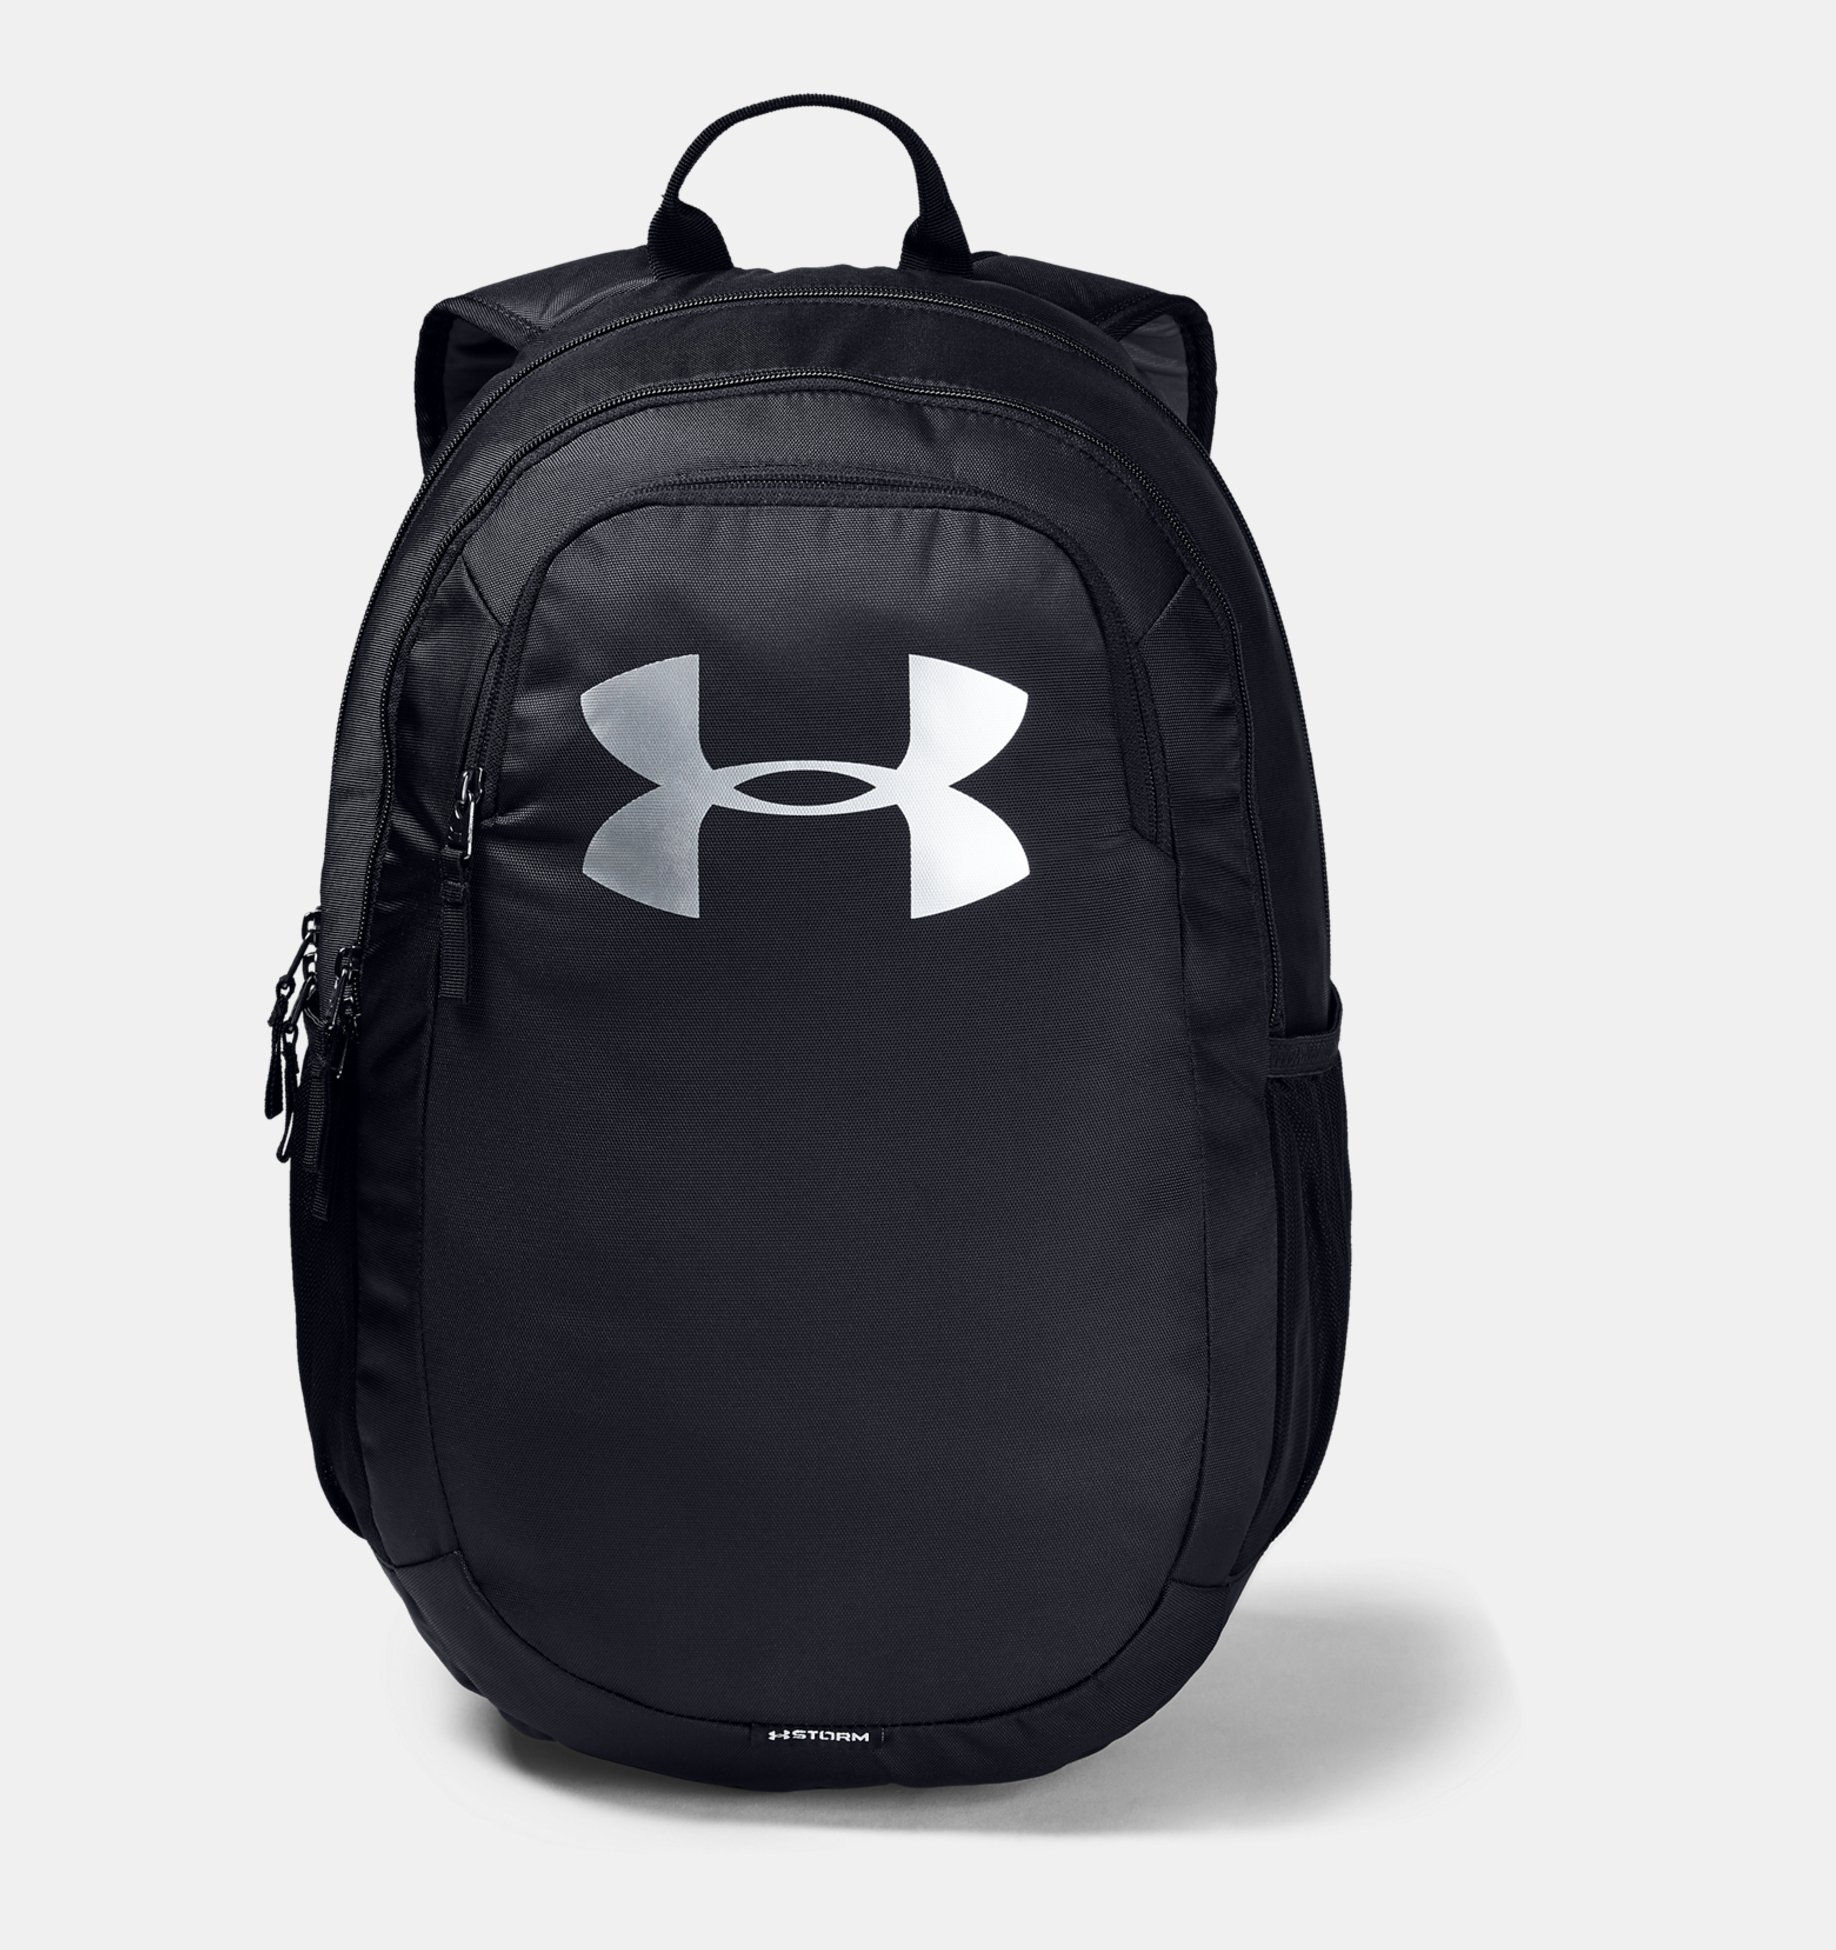 https://www.underarmour.com.ar/on/demandware.static/-/Sites-underarmour_staging/default/dweec810e9/new_images/1342652/192810228177/192810228177-1.jpeg